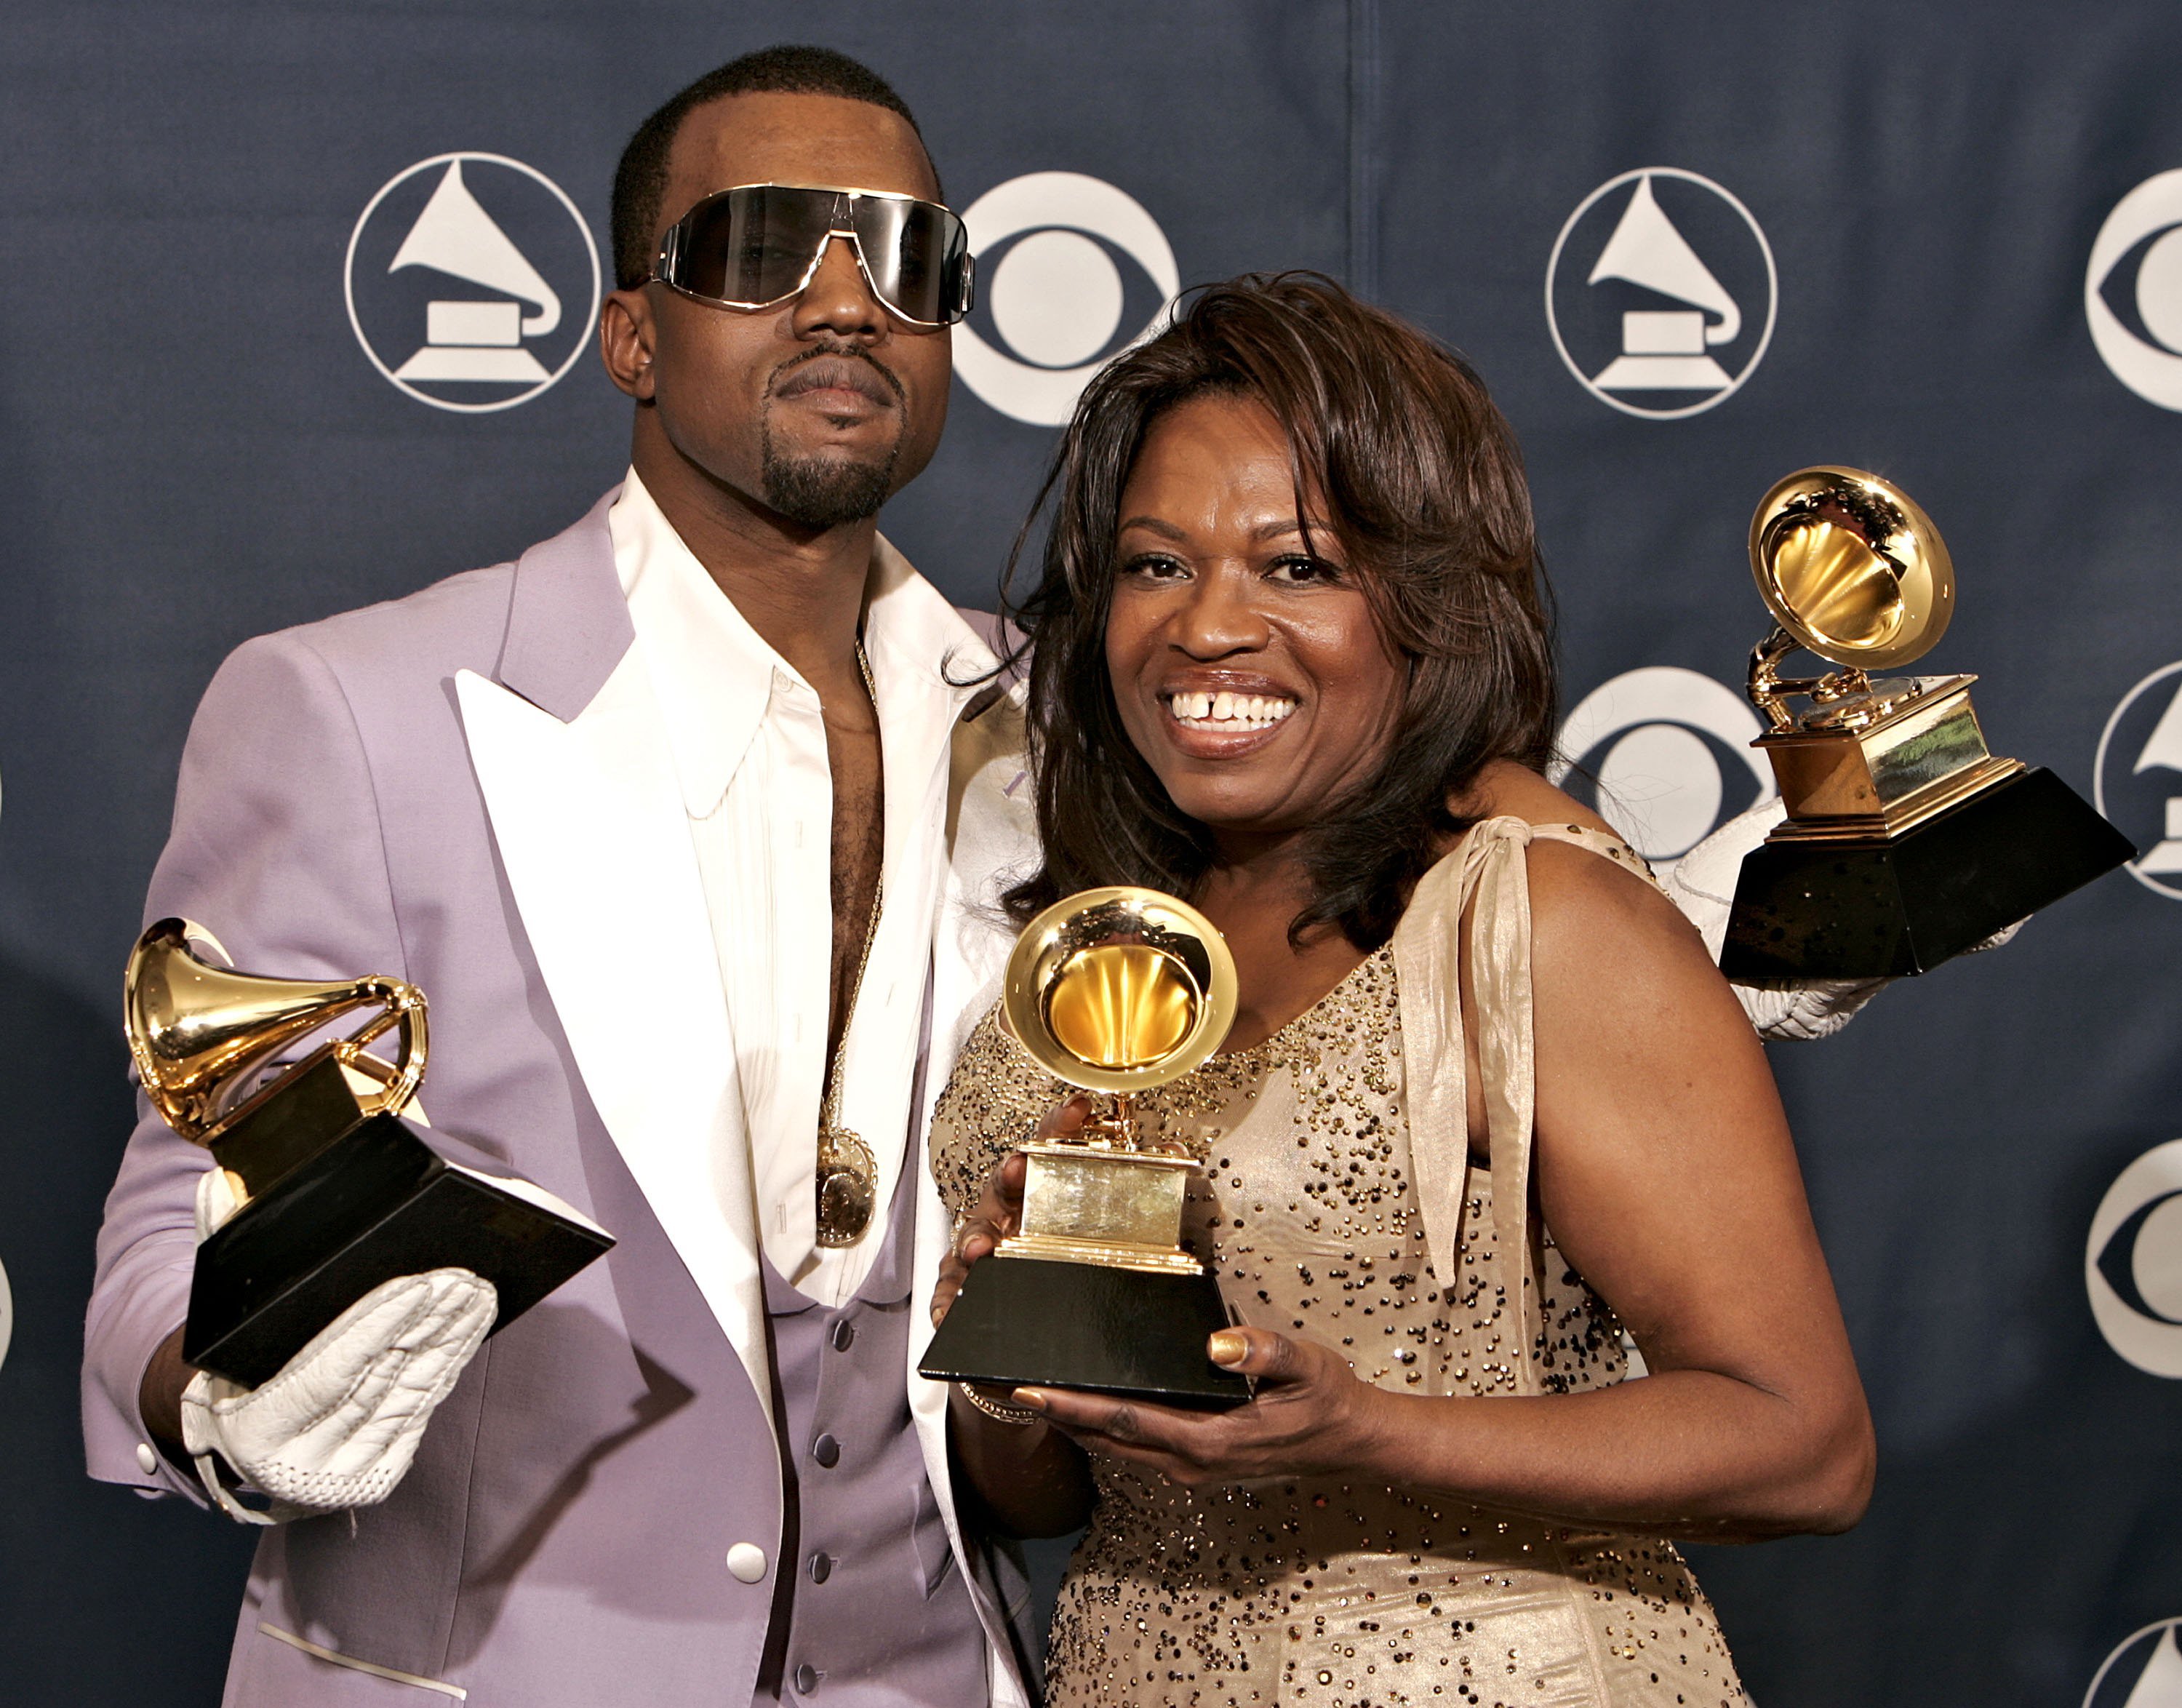 Kanye West and his mom, Donda, holding his three Grammy Awards while smiling for the camera on the red carpet.